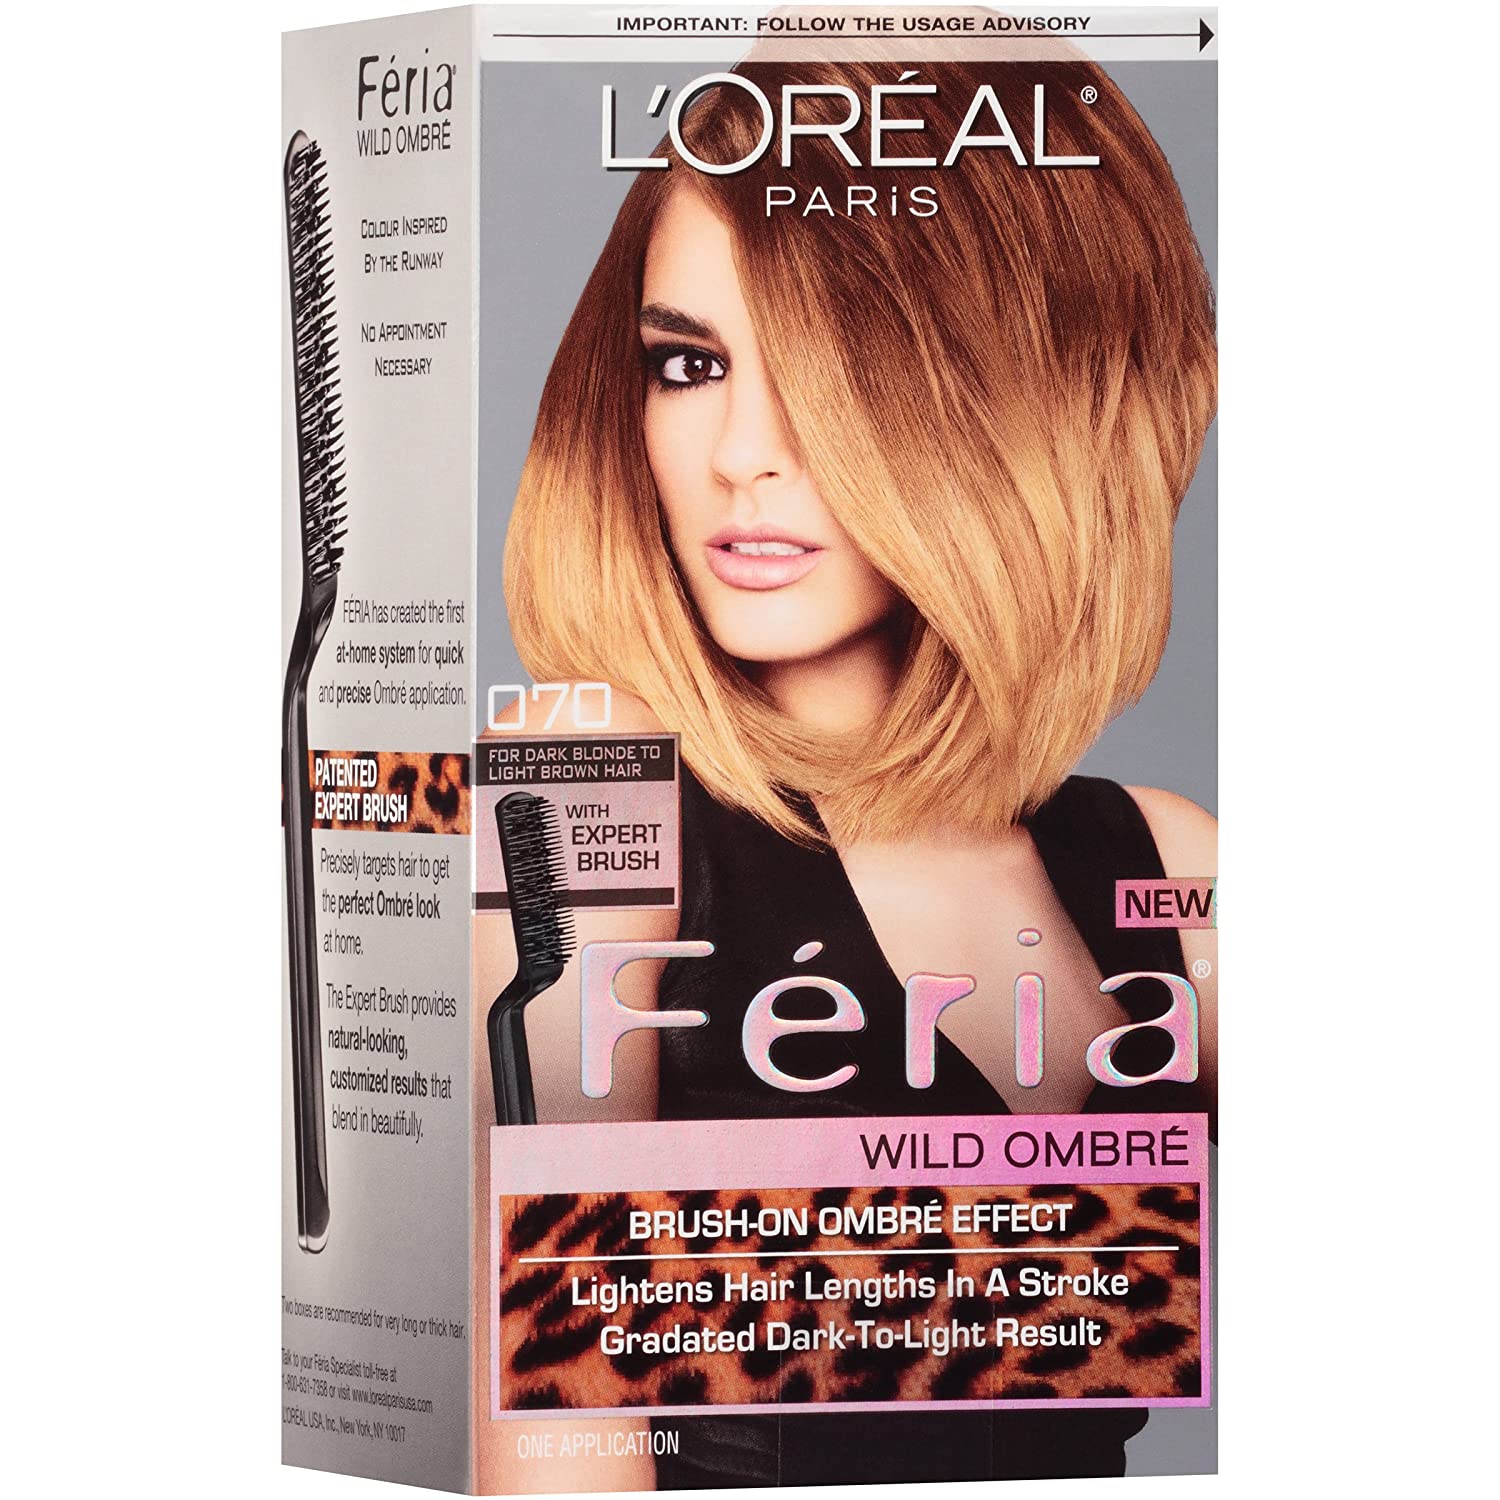 Feria Brush-on Ombre Effect Hair Color, O70 Wild Ombre for Dark Blonde to Light Brown Hair - 1 Application Kit